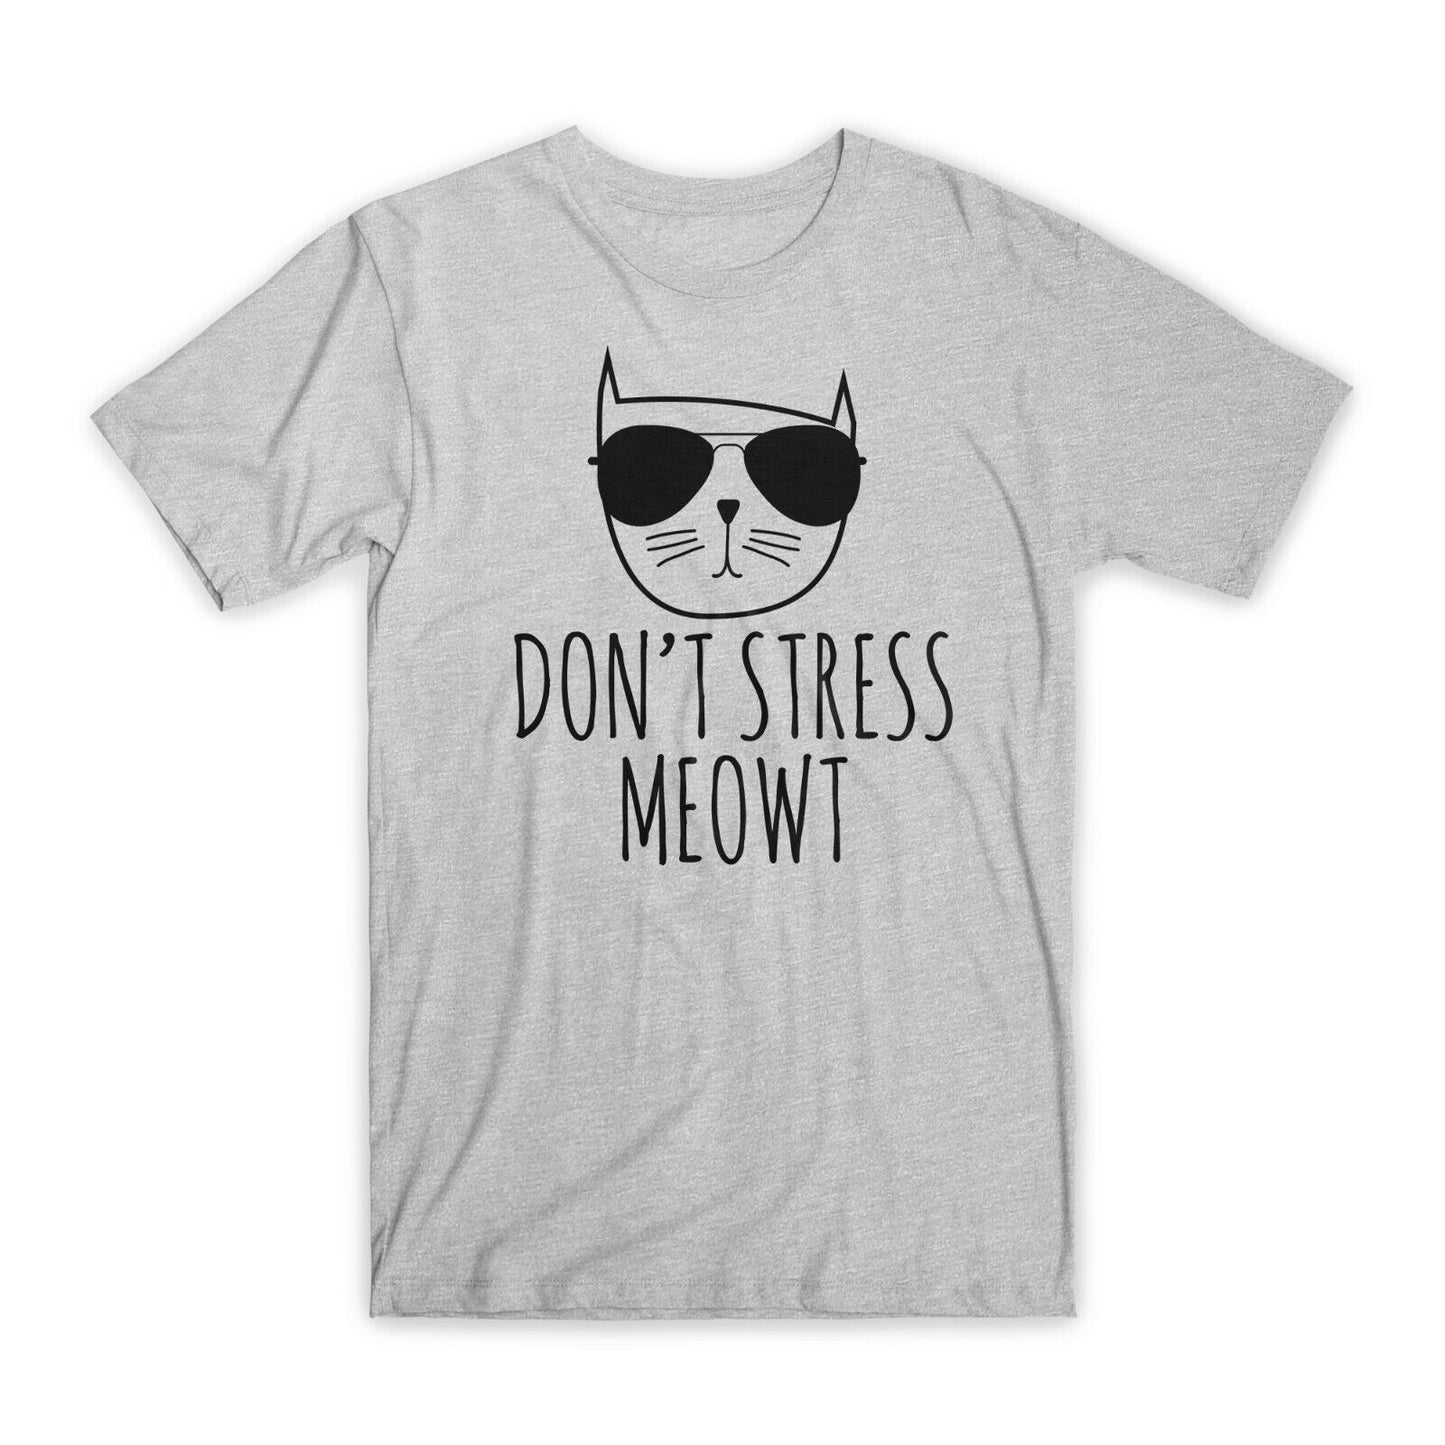 Don't Stress Meowt T-Shirt Premium Soft Cotton Crew Neck Funny Tees Gifts NEW